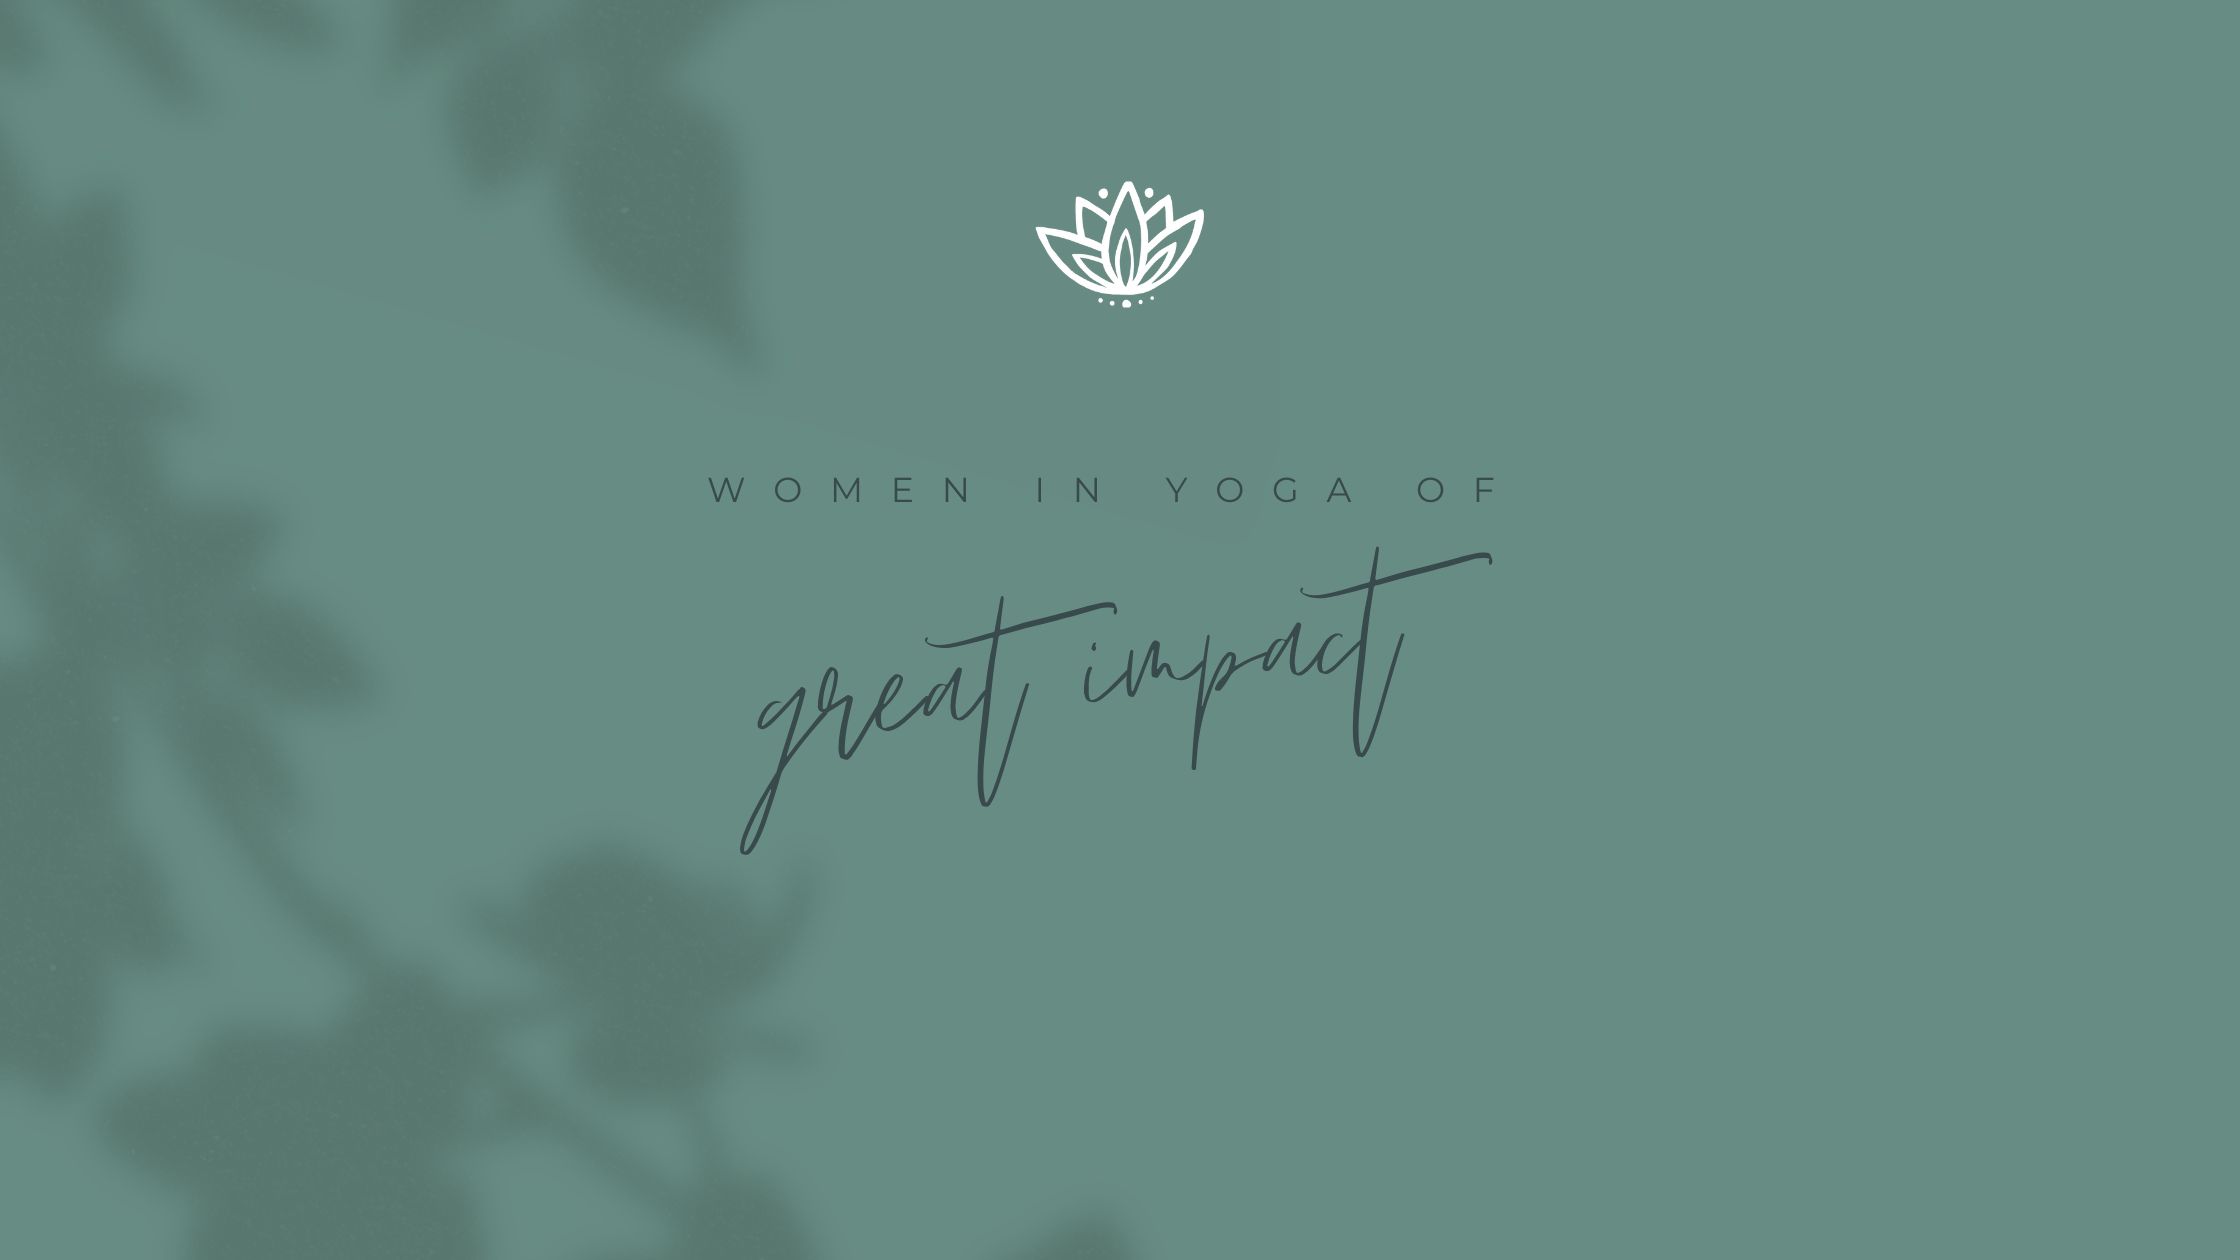 Impact yoga women, women who have impacted the path of yoga, yoga influenced by women, womens history month in yoga